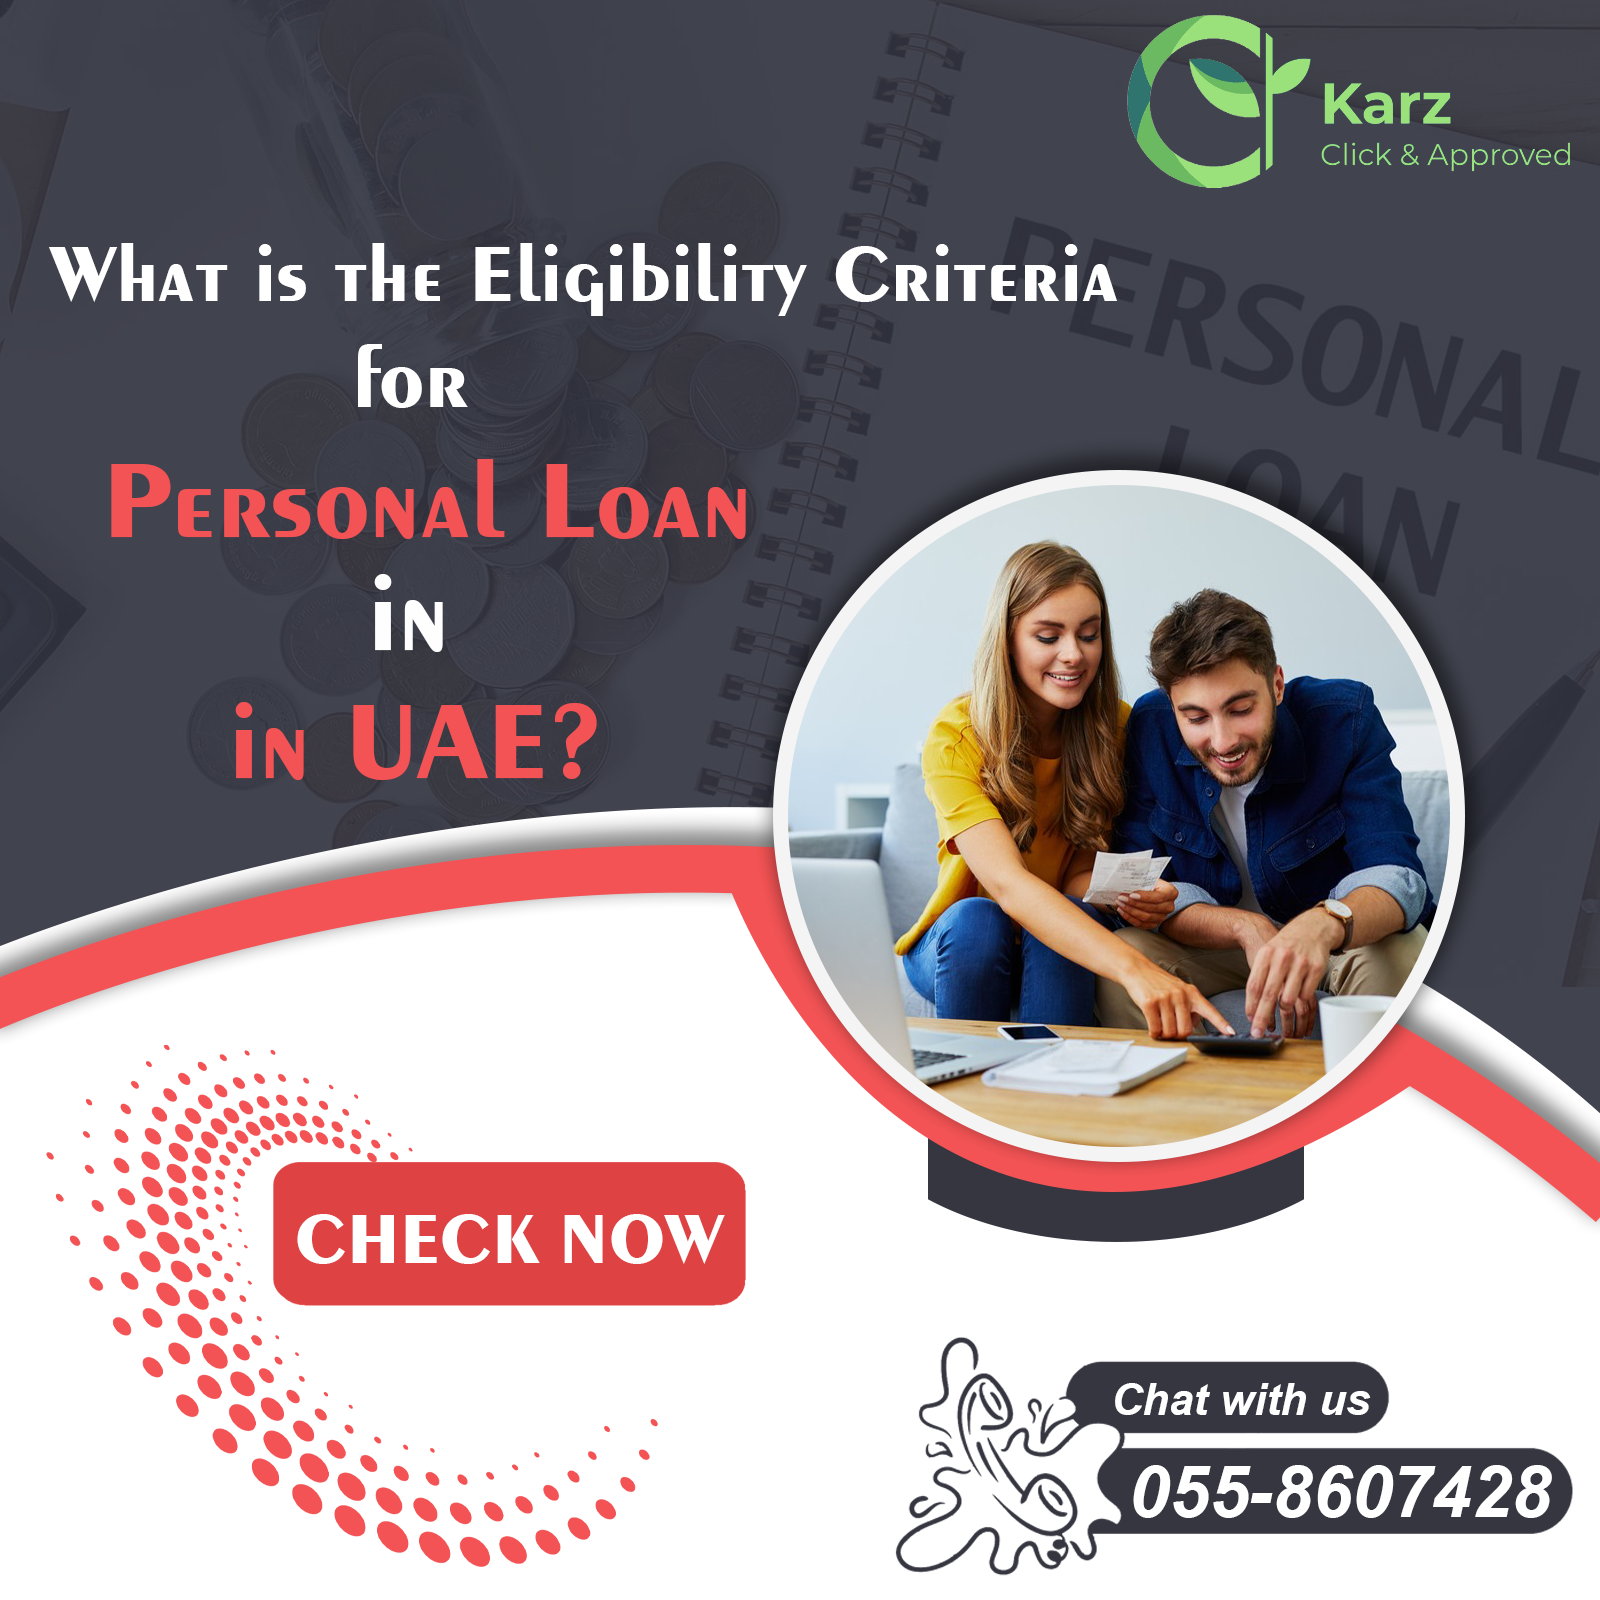 Eligibility for Personal Loan in UAE